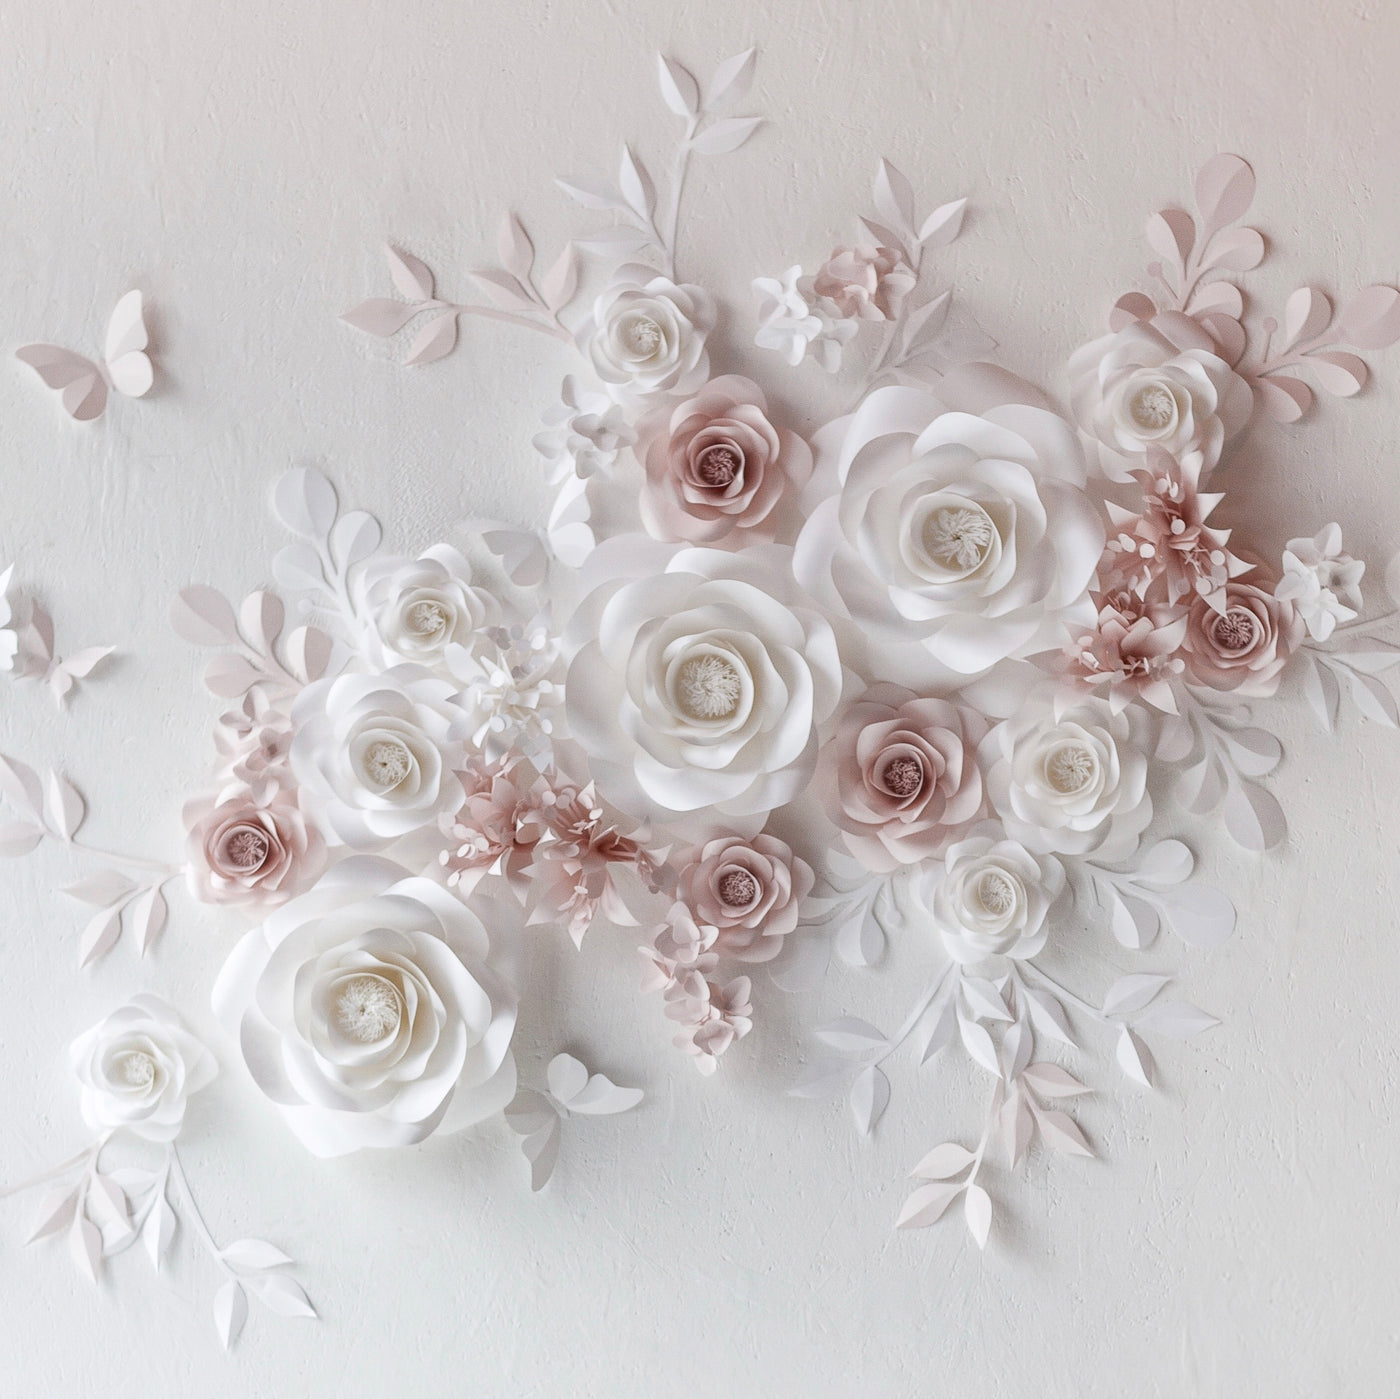 Close-up of intricately crafted paper flowers for a stunning wedding backdrop